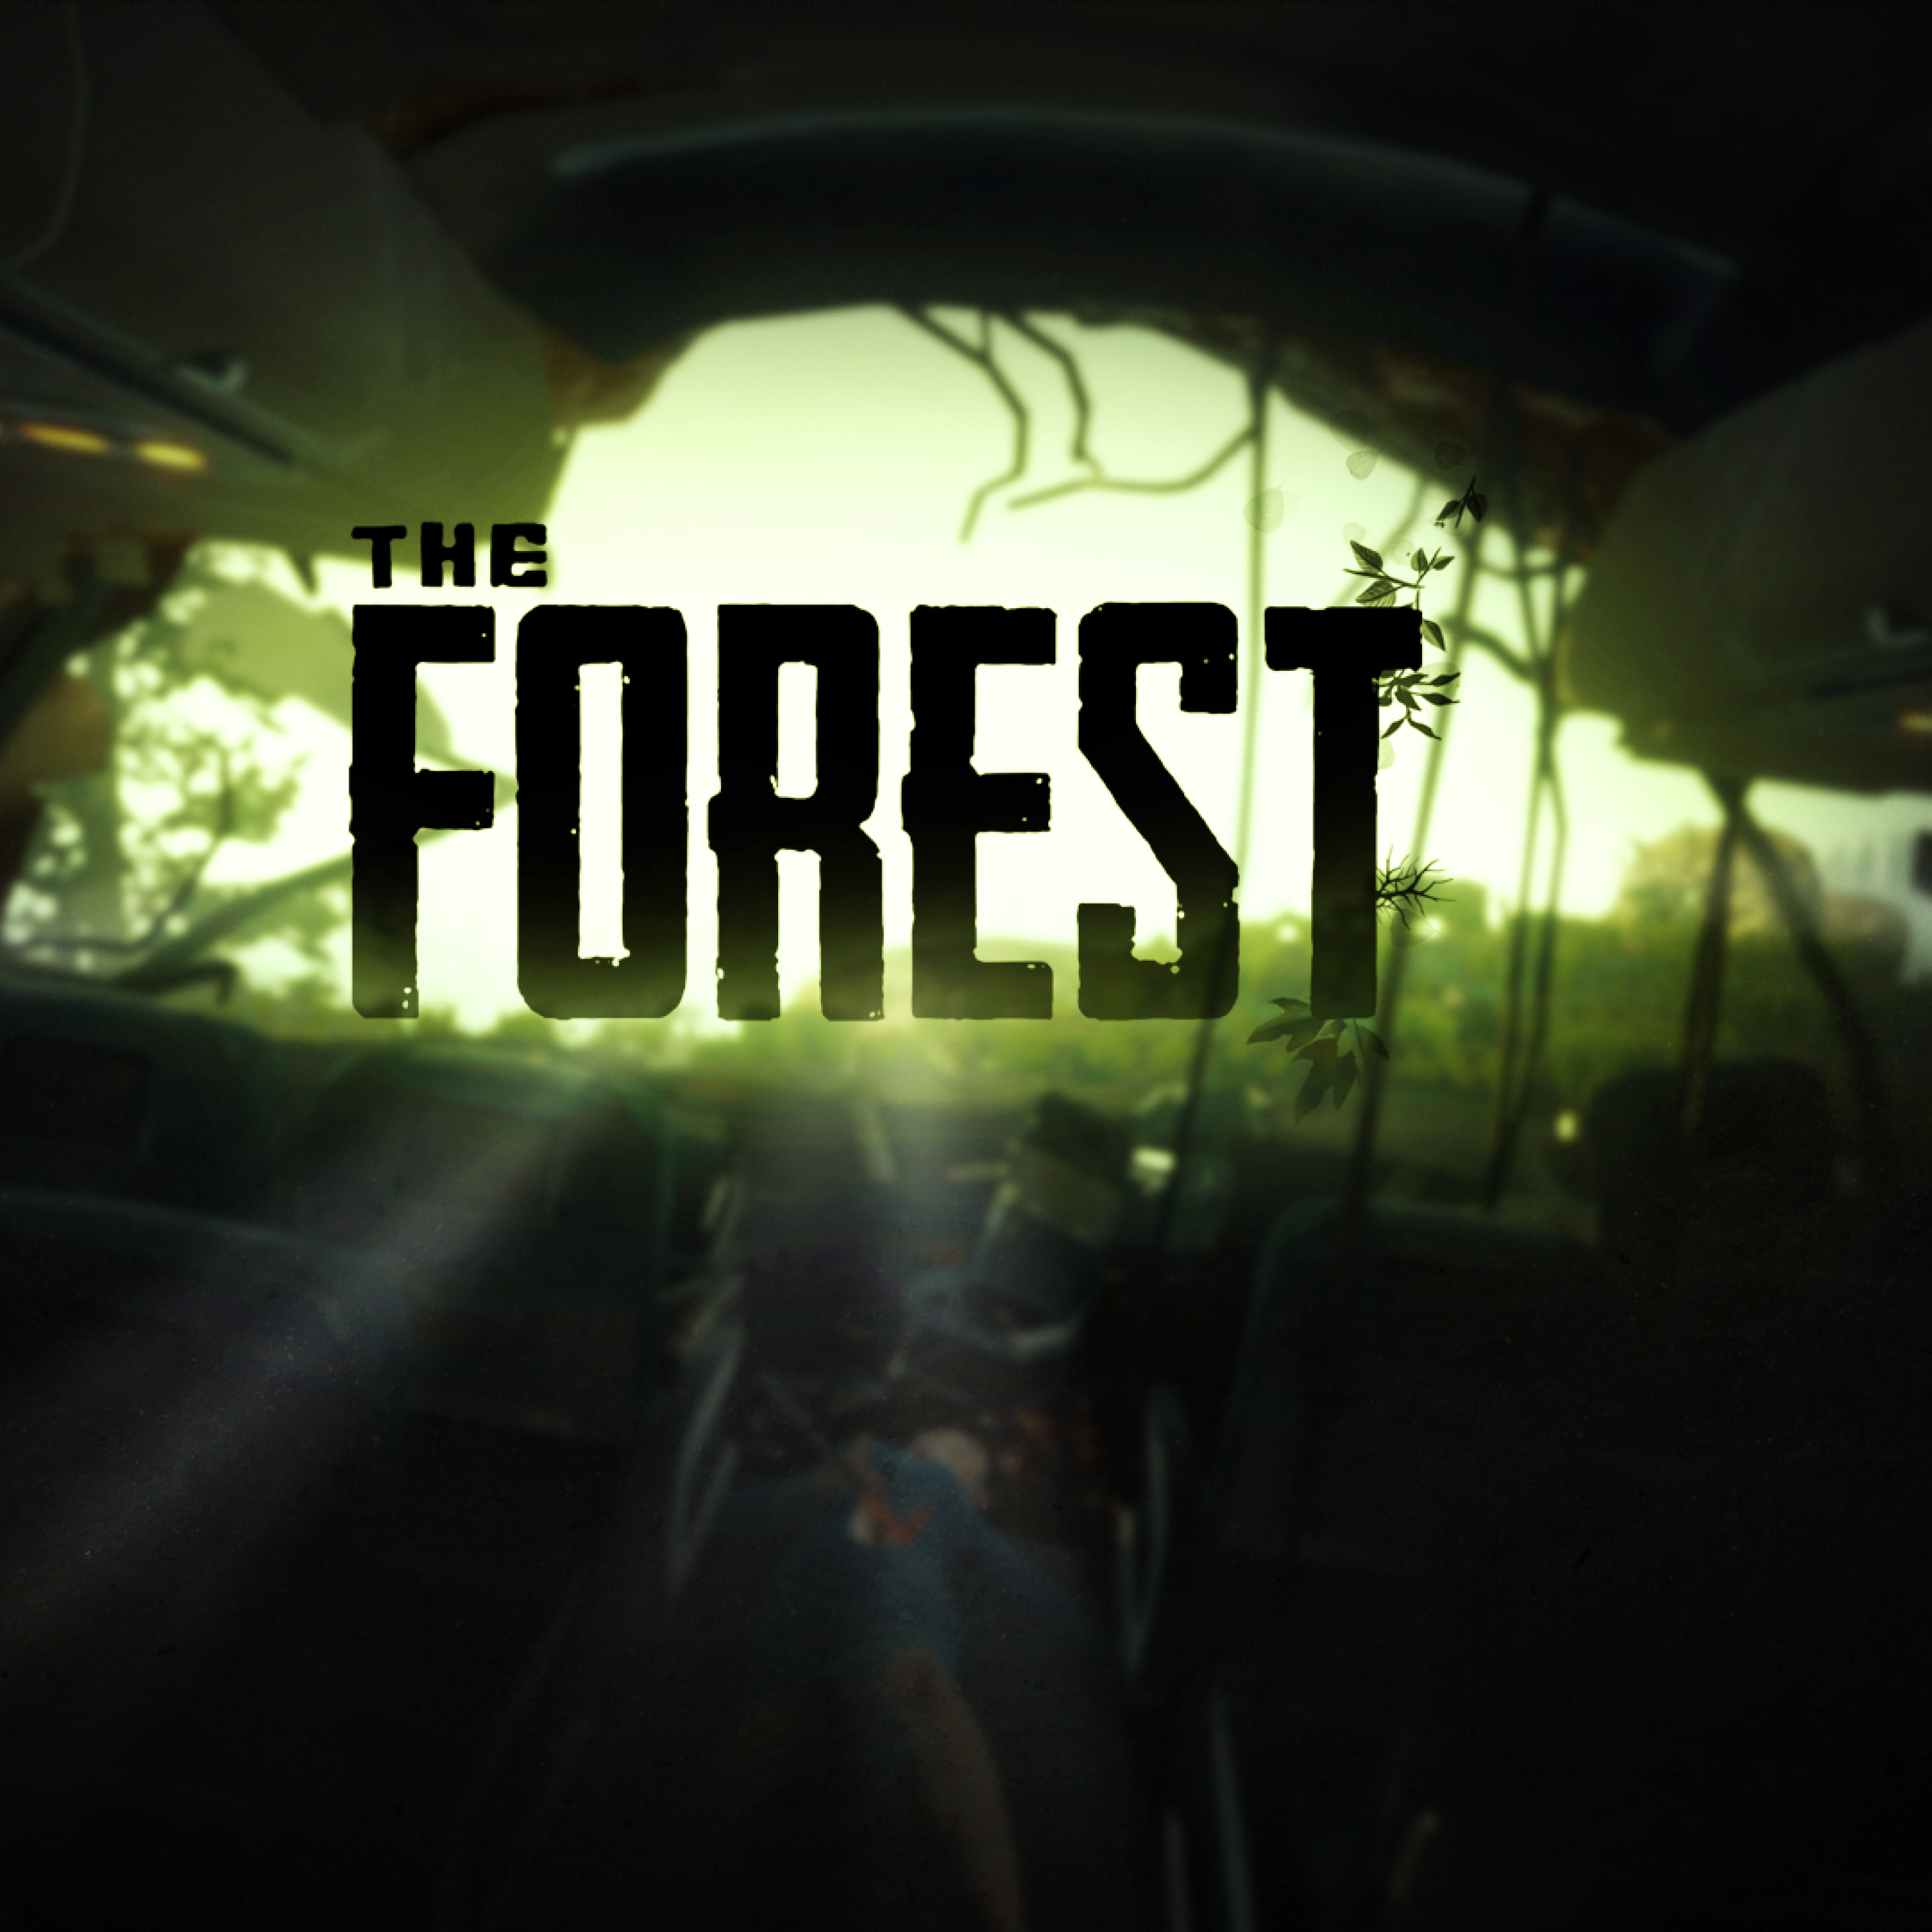 The forest торрент steam фото 96